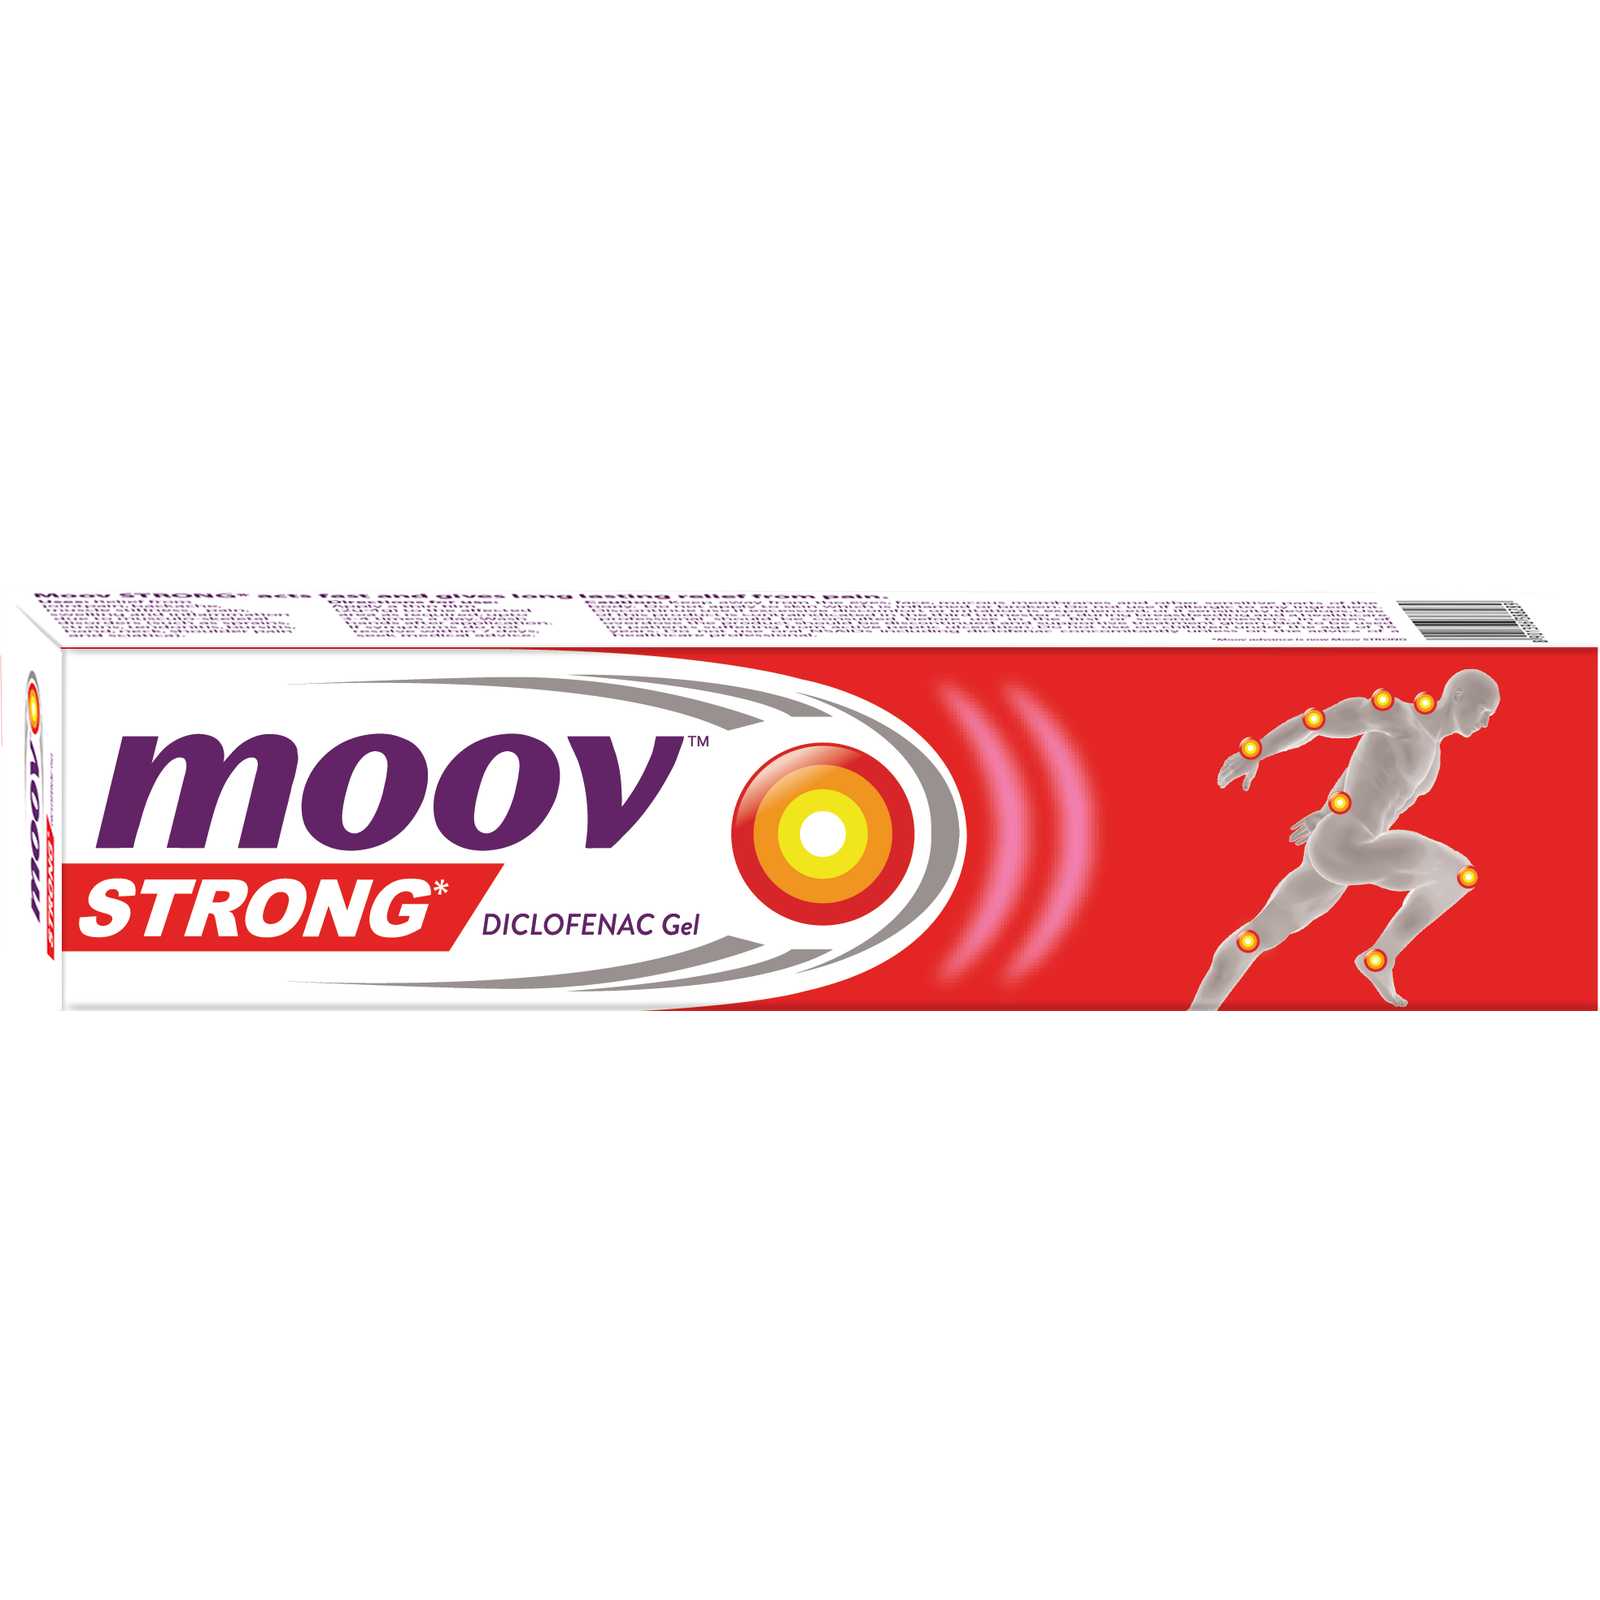 Moov strong pain relief balm